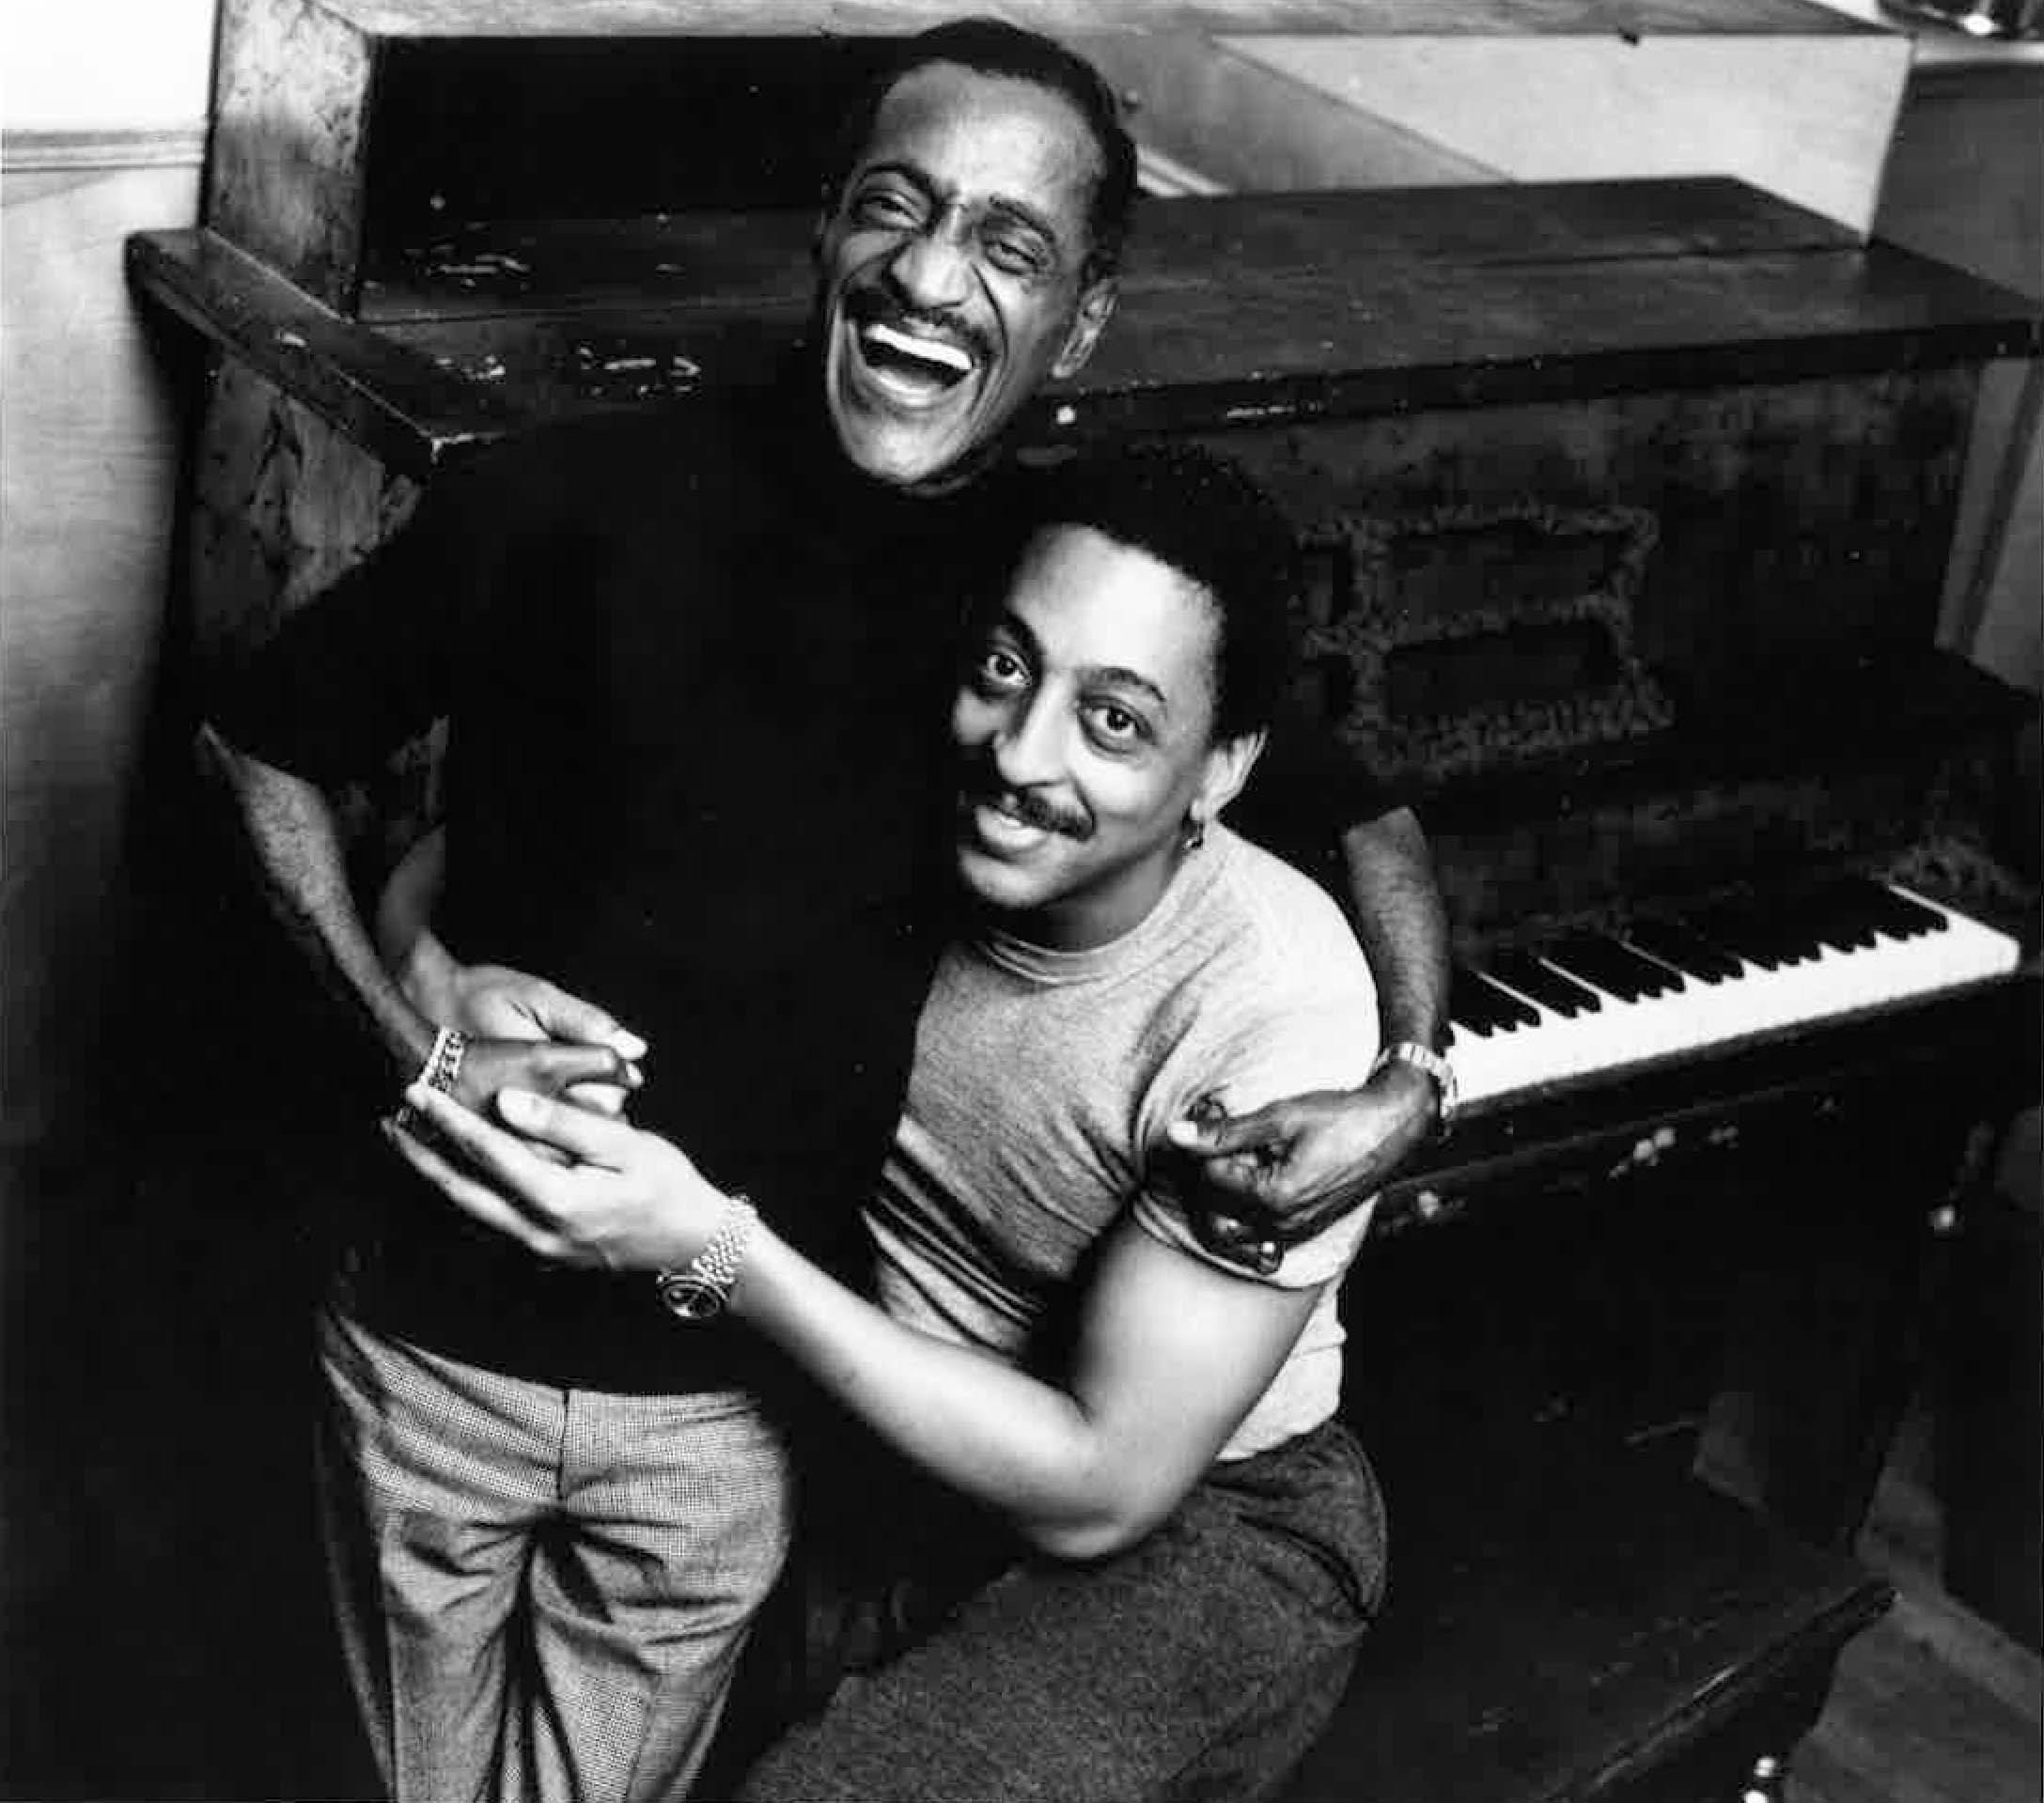 In a black and white archival photo, Sammy Davis Jr. stands beside Gregory Hines, who is seated at a piano bench. Davis Jr. laugh and Hines smiles as the two embrace.